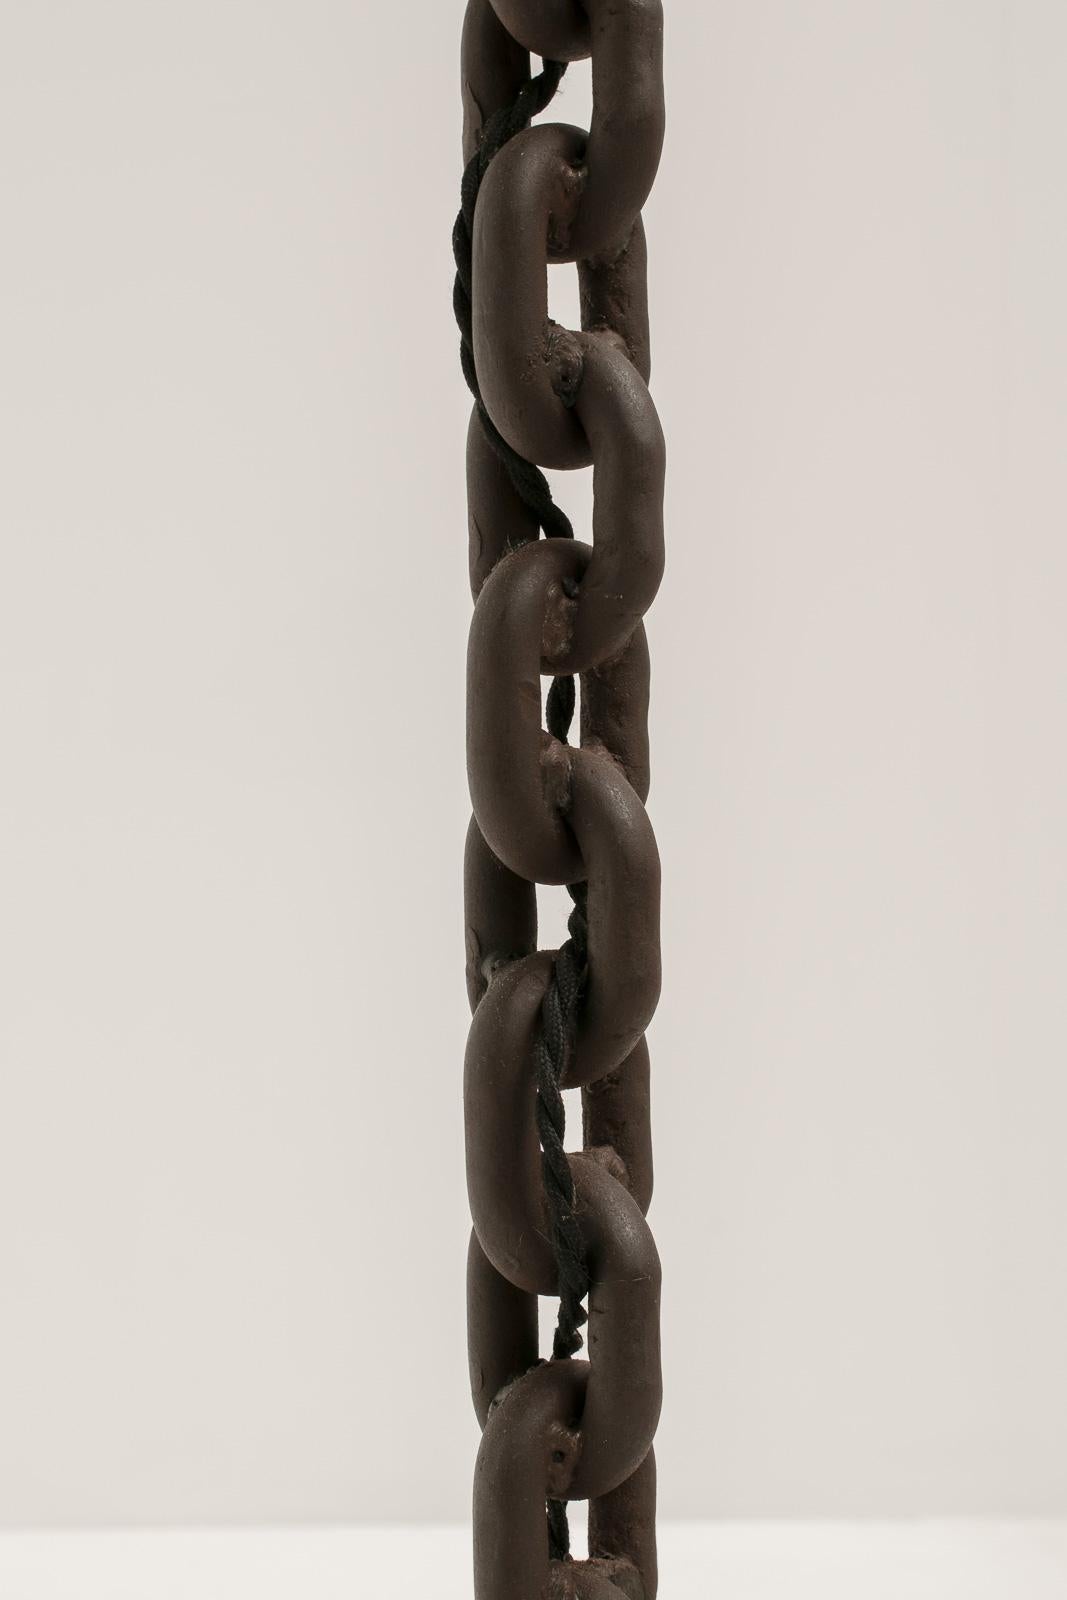 Large Chain Link Floor Lamp in the style of Franz West, France, 1970s 4